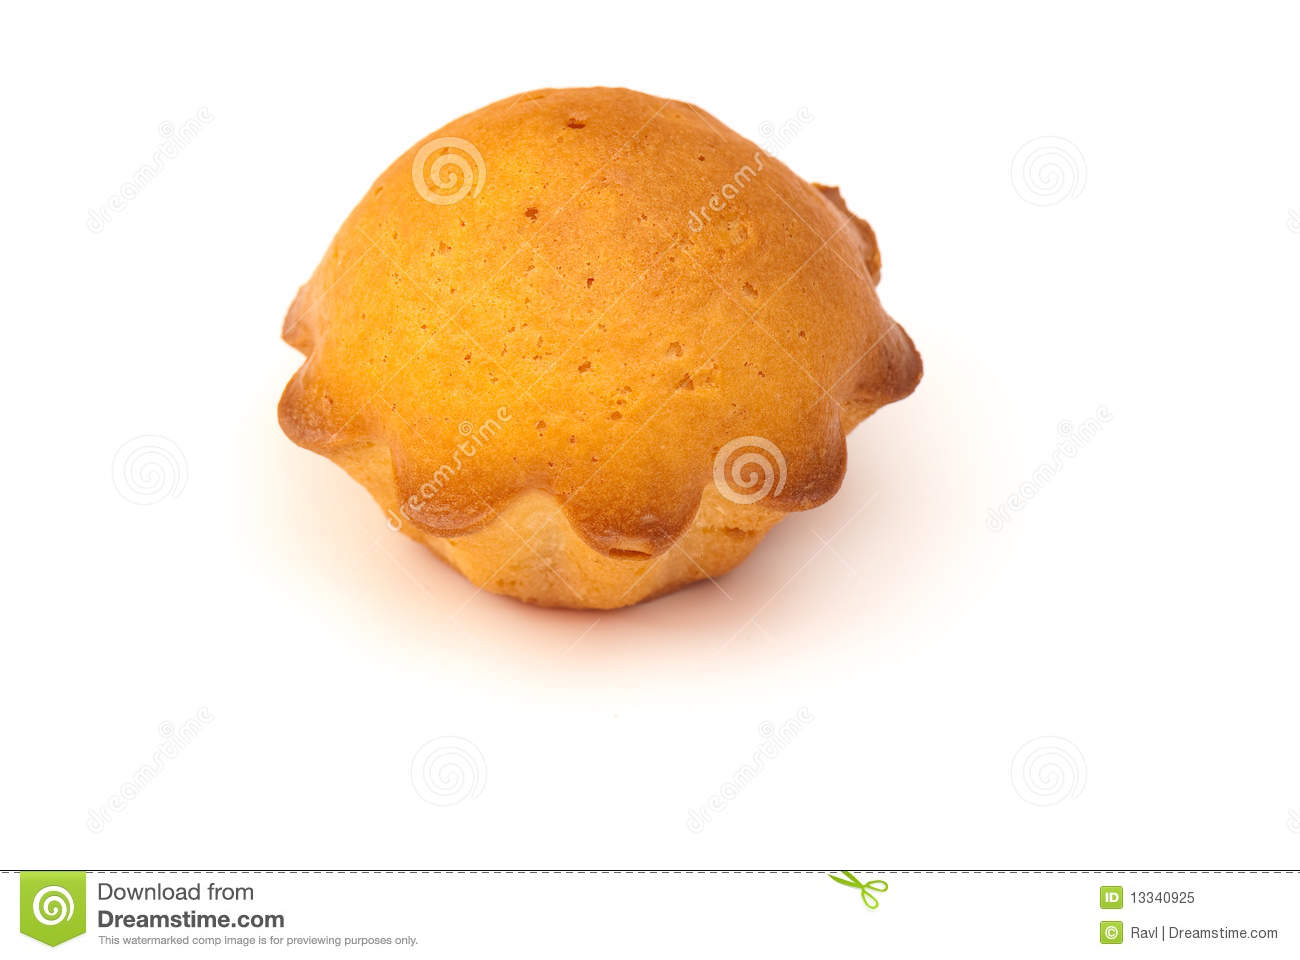 Sweets Photographed In Studio On White Isolated Background 